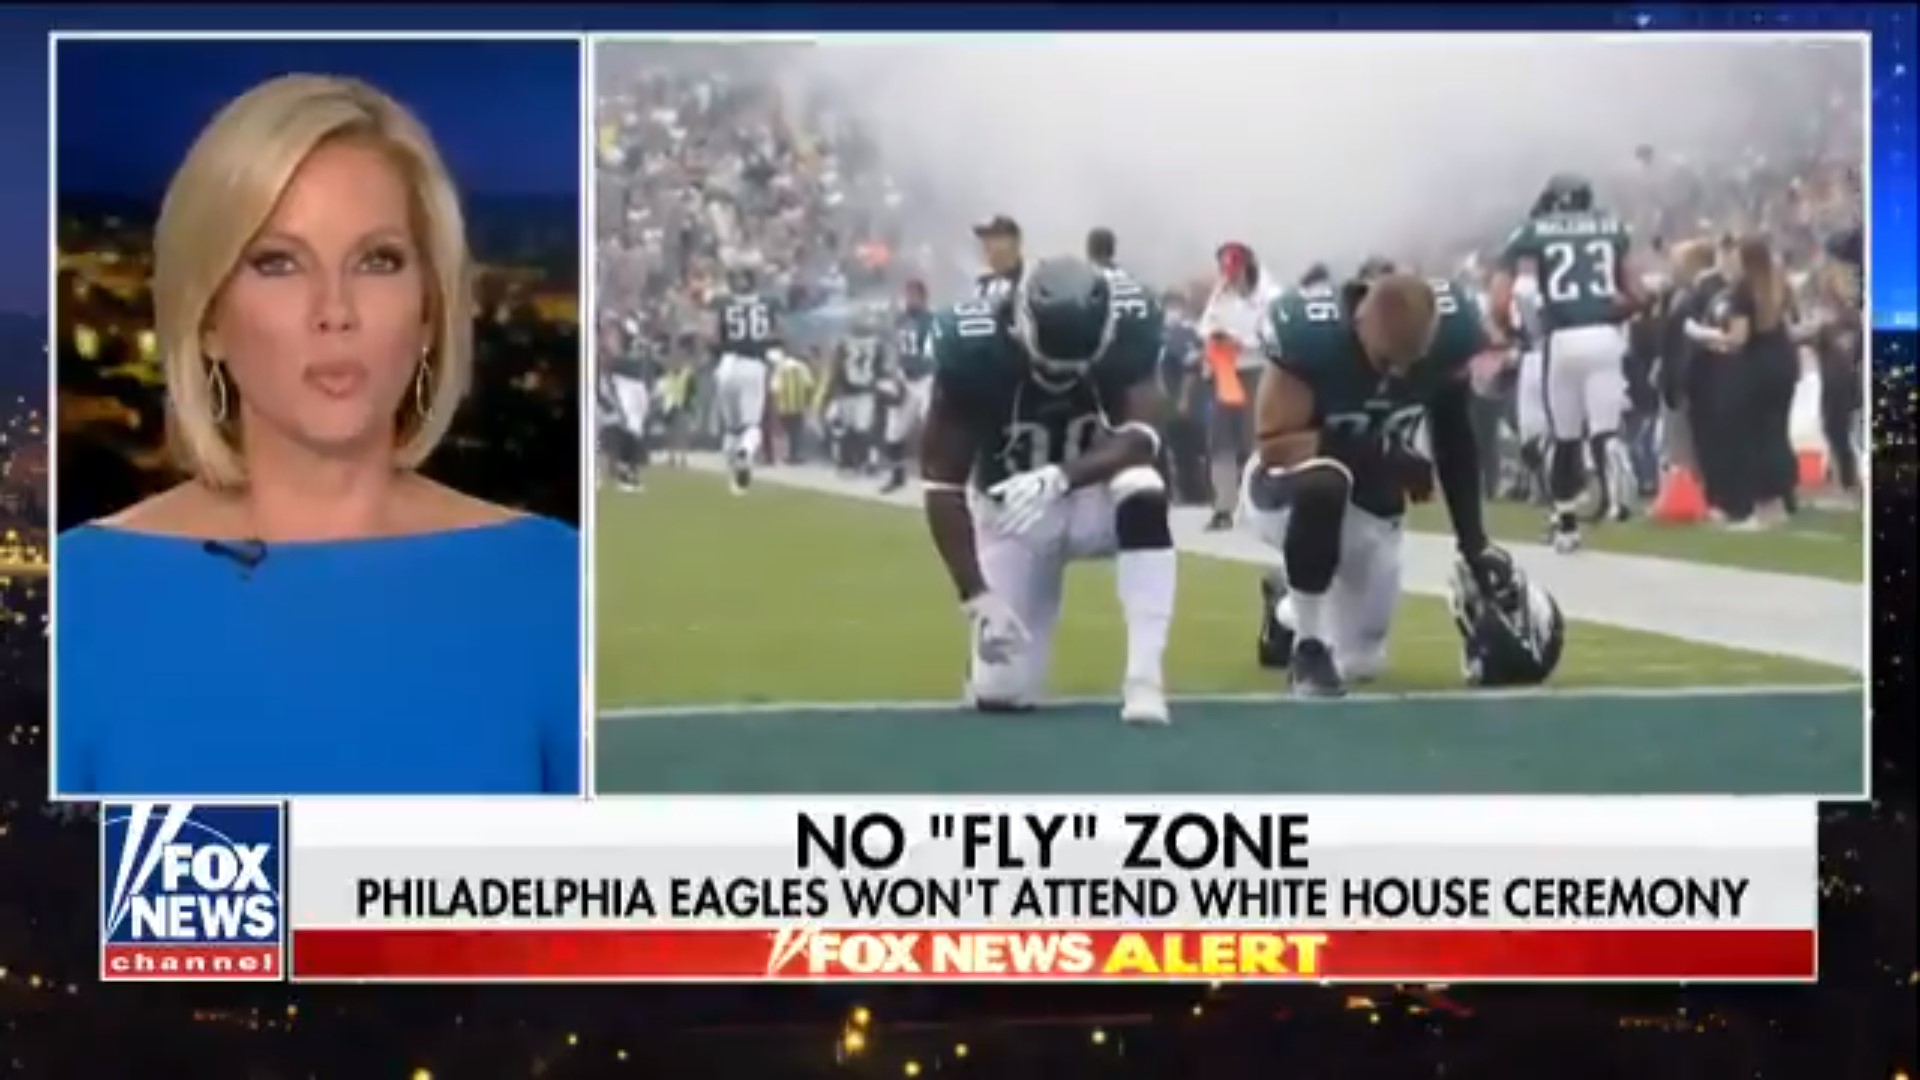 Fox News Passes Off Photos Of Eagles Players Praying As Kneeling During National Anthem